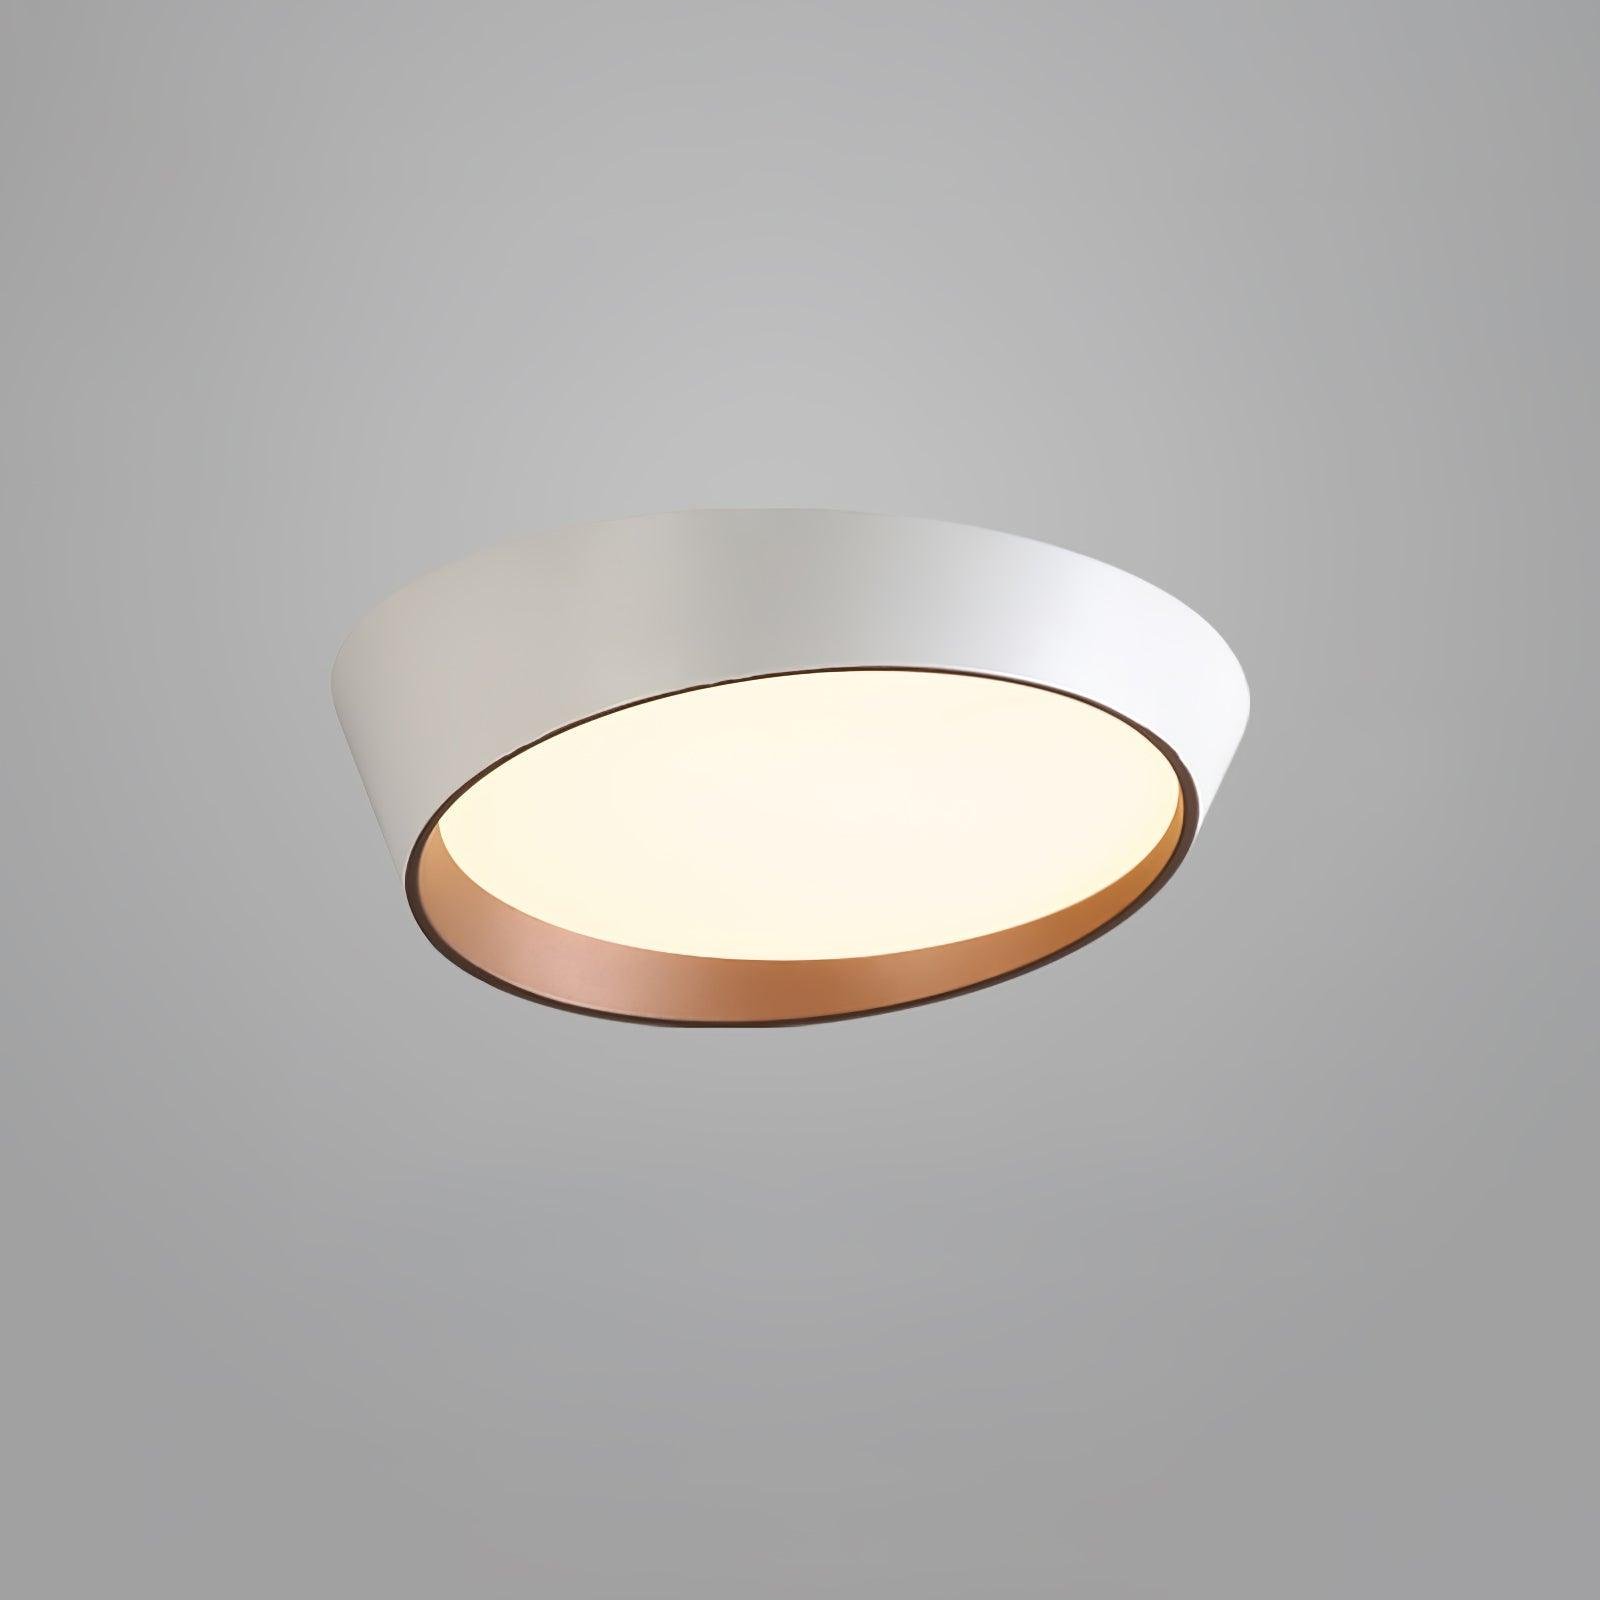 White Toronto Ceiling Lamp with Cool Light - Diameter 15.7 inches x Height 4.7 inches (40cm x 12cm)